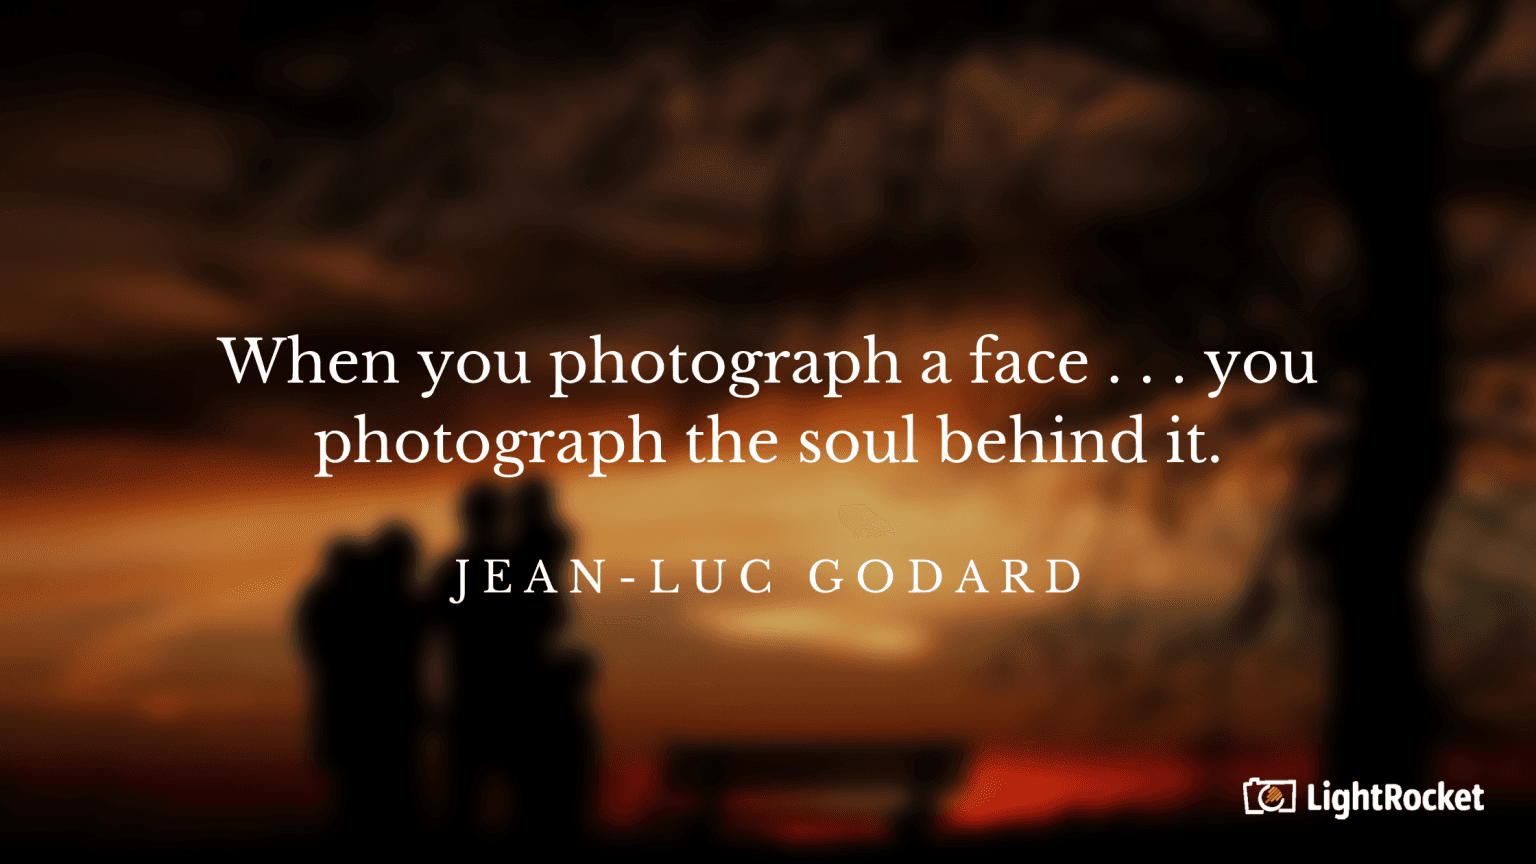 “When you photograph a face . . .you photograph the soul behind it.” – Jean-Luc Godard